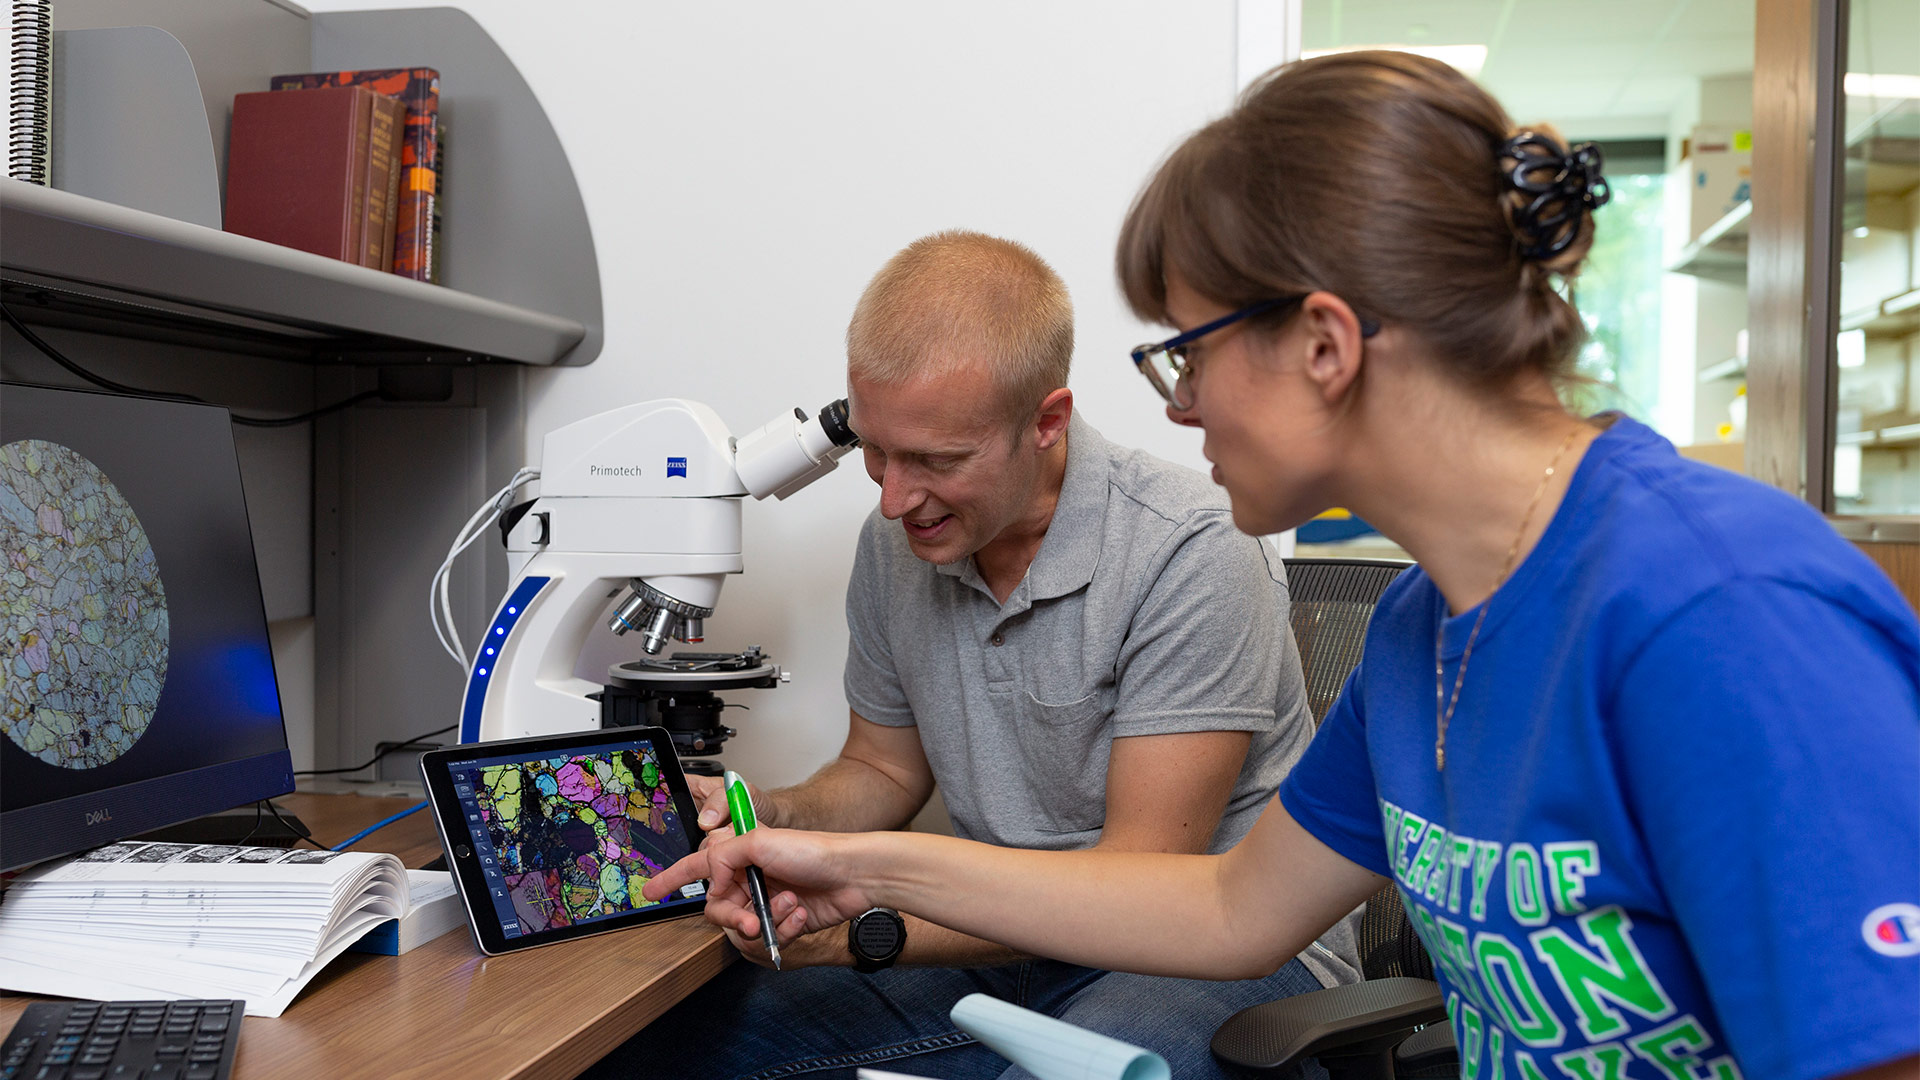 Dr. Daniel Imrecke and research assistant Ane Slabic examine an analysis on a tablet